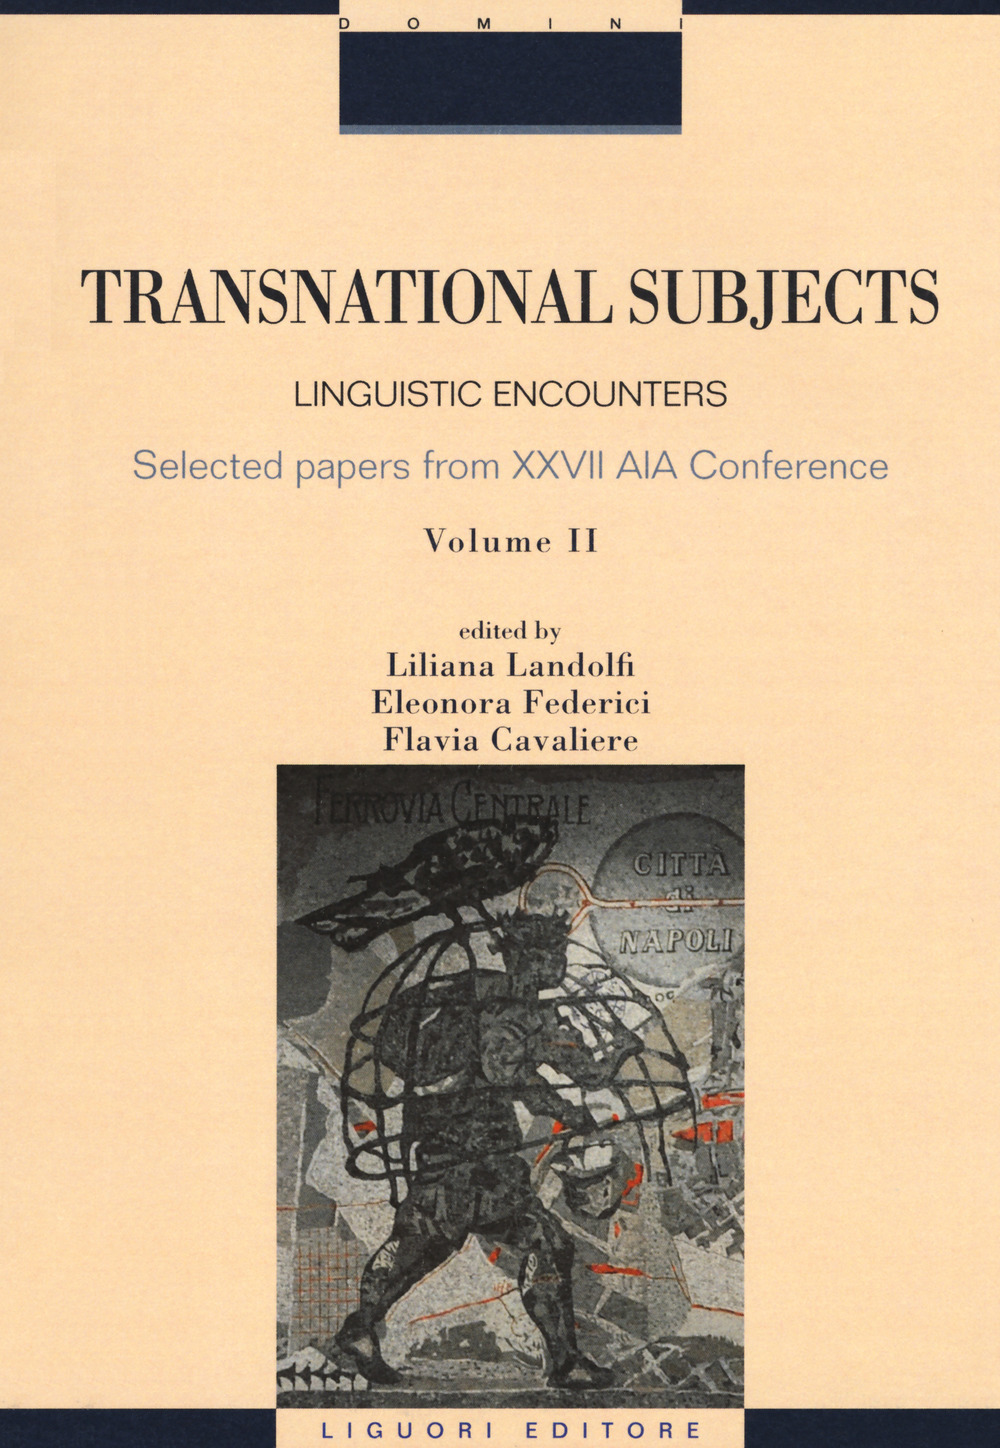 Transnational subjects. Selected papers from XXVII AIA Conference. Vol. 2: Linguistic encounters